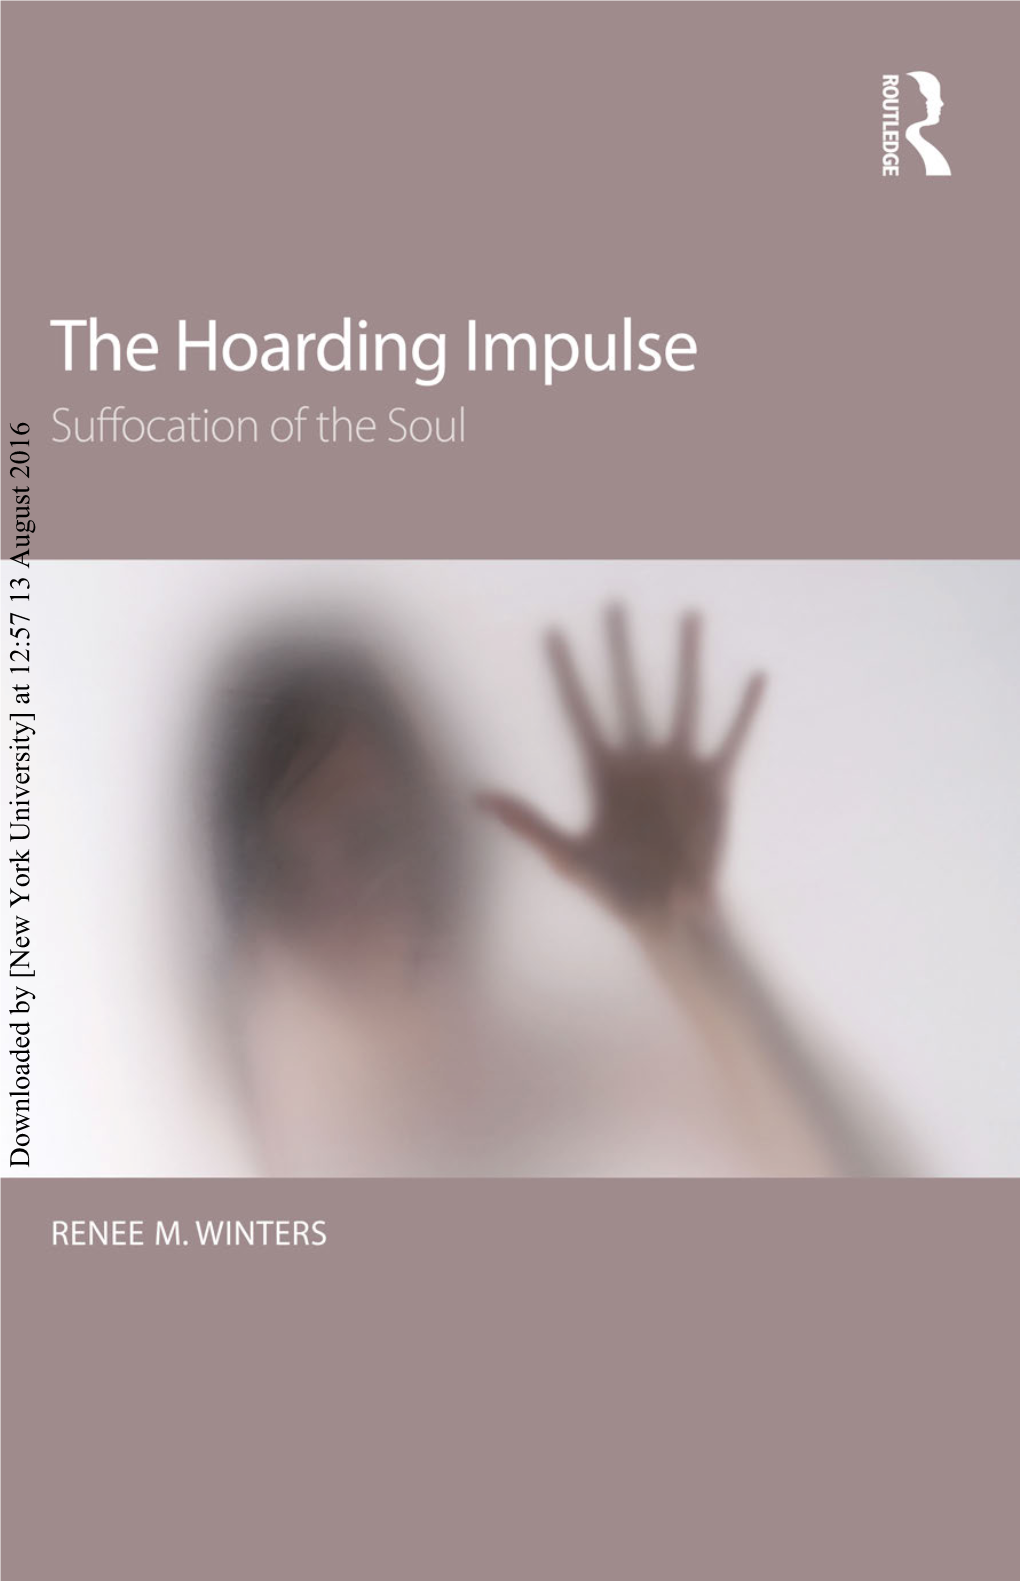 Downloaded by [New York University] at 12:57 13 August 2016 the HOARDING IMPULSE